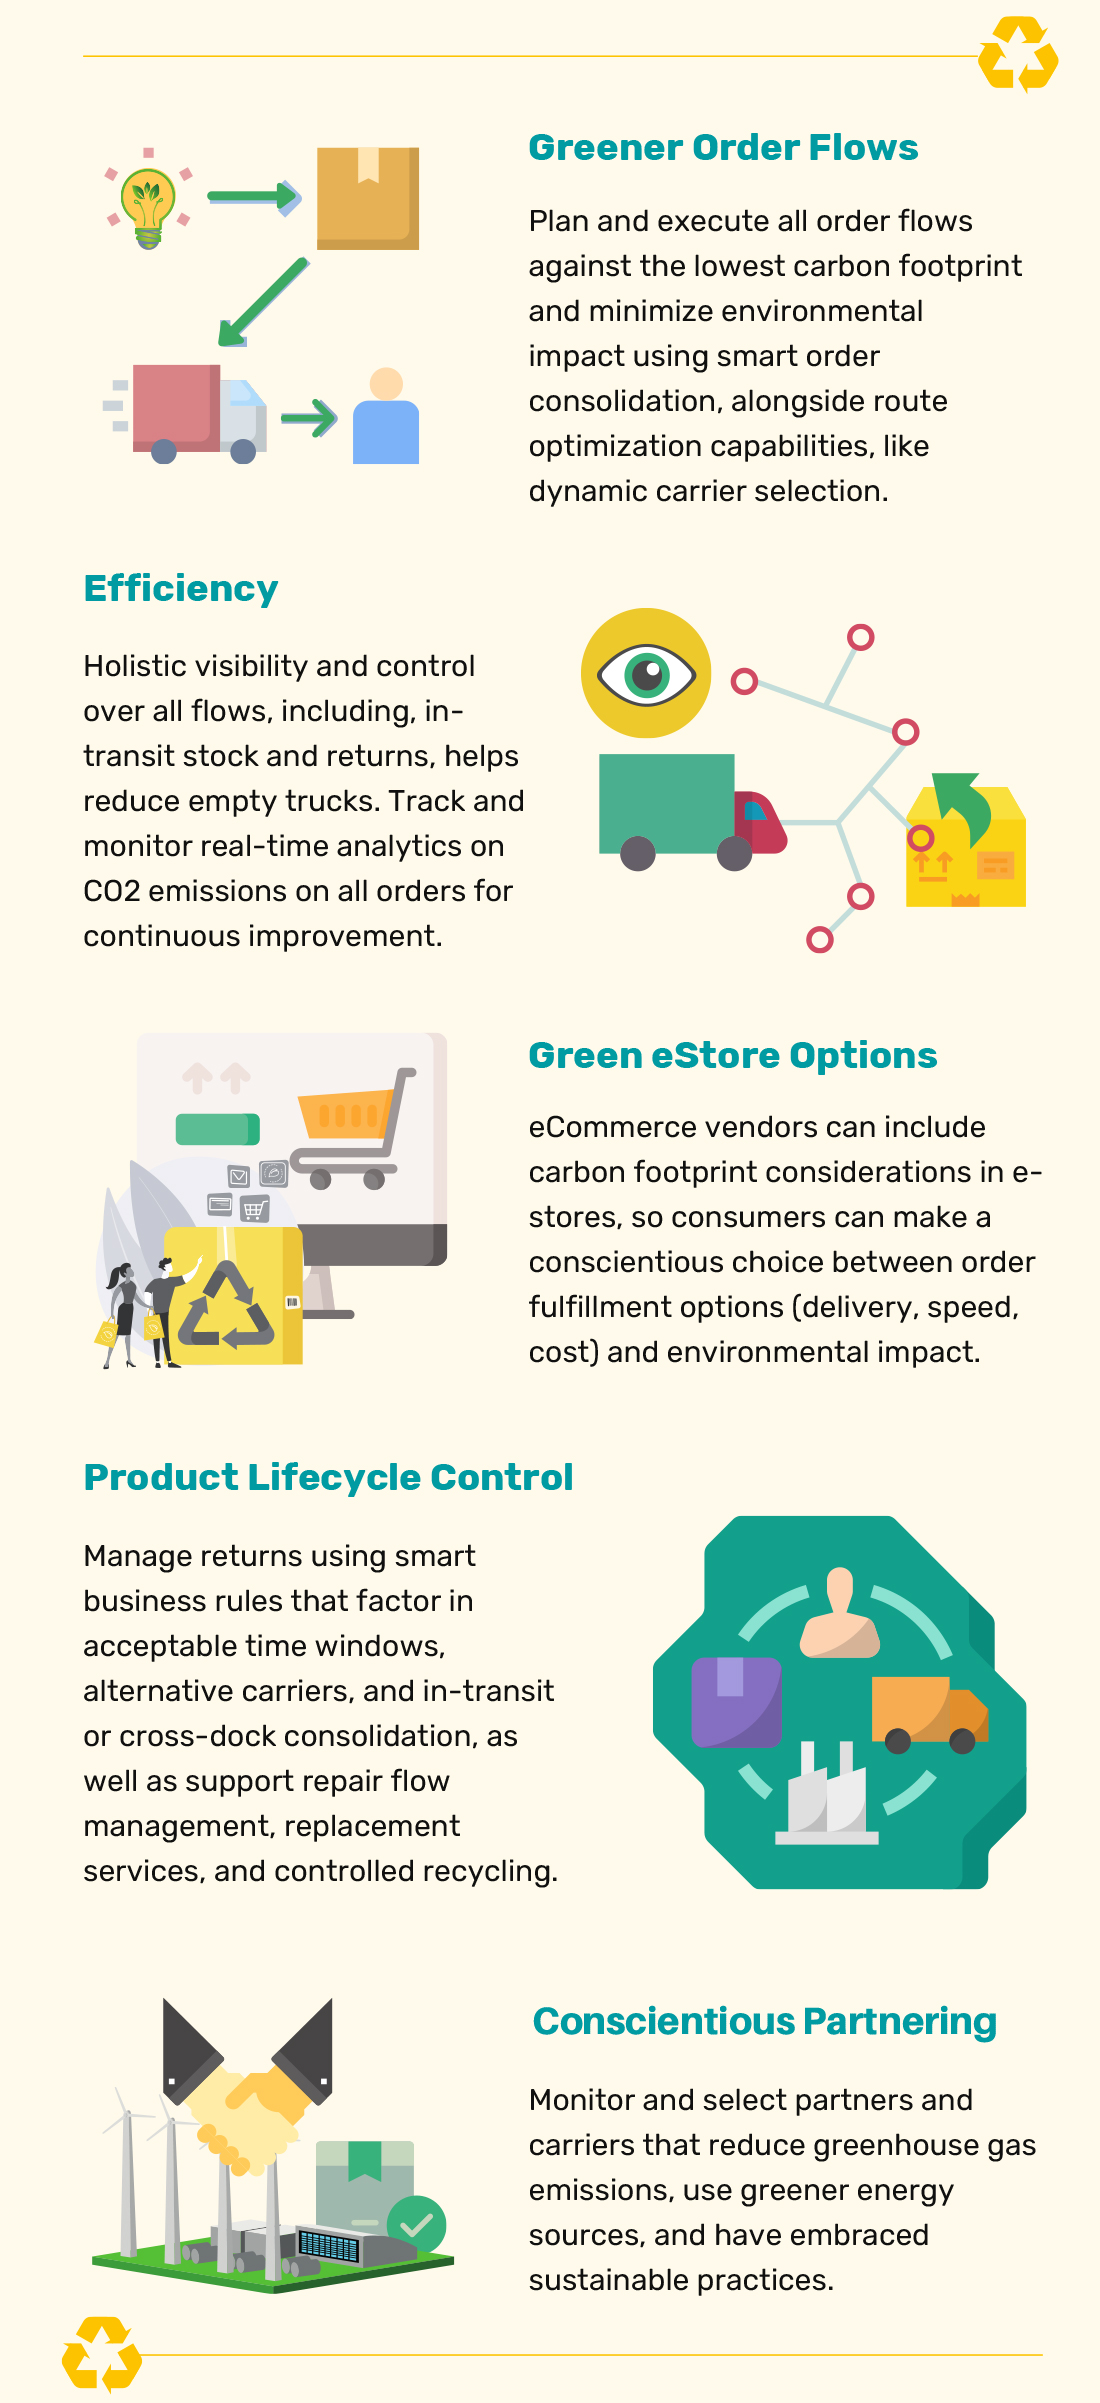 5 Smart Ways to Reduce Your Carbon Footprint